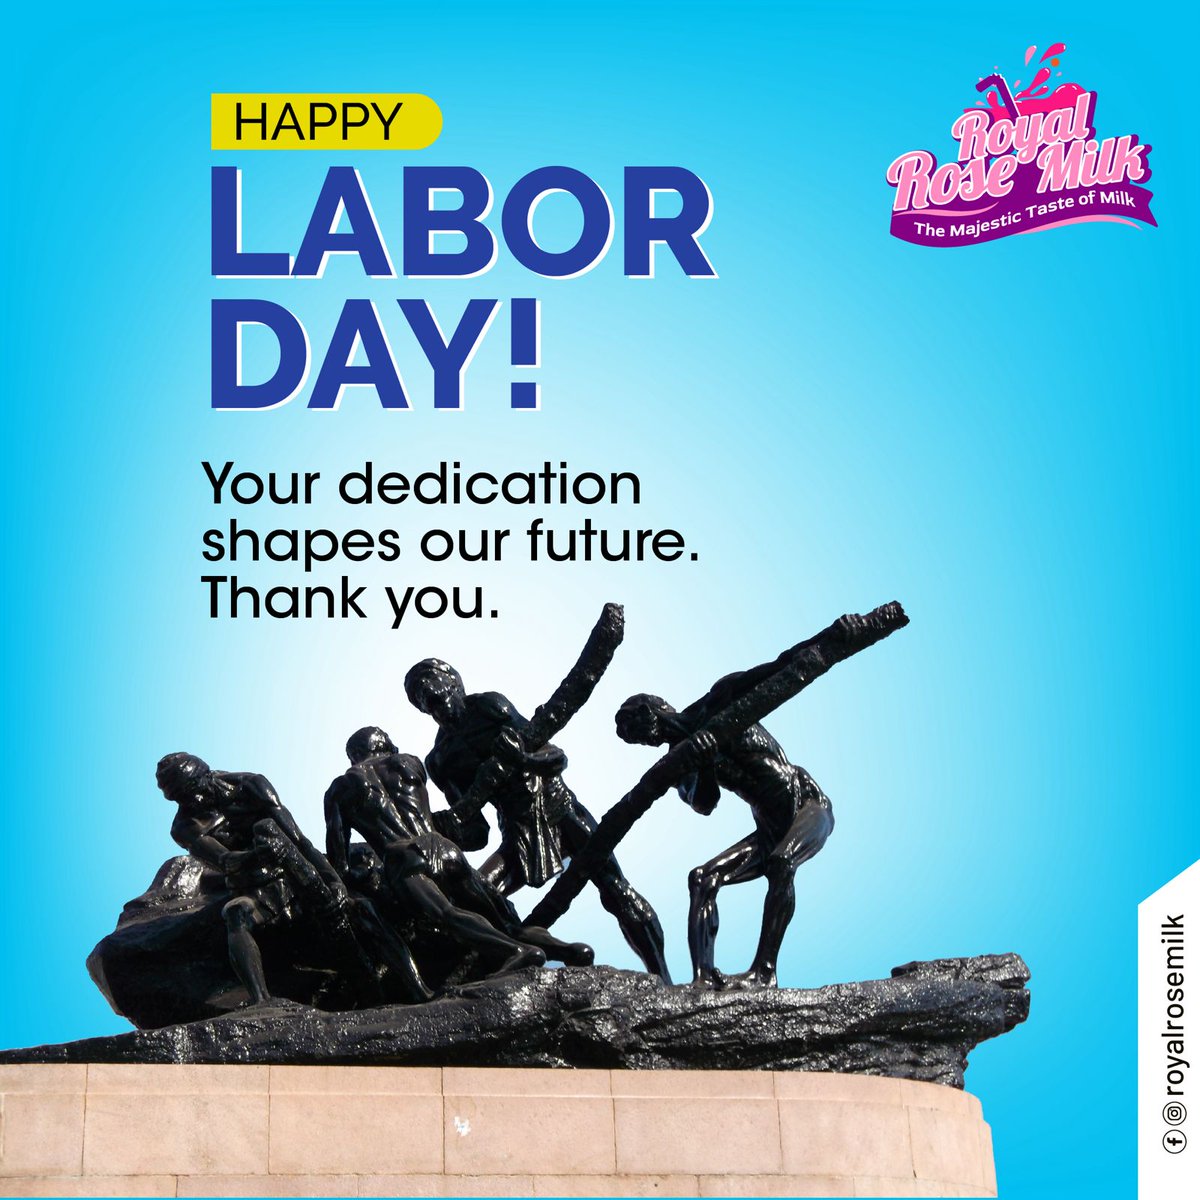 Proudly celebrating our everyday heroes!🫡

#labourday #labourdayweekend #mayday #employeeappreciation #employeerecognition #workersday
#rosemilk #rosemilkshake #milkshake #milkshakesmoothies #milkshaketime
#franchise #franchiseopportunities #franchiseebusiness #businessowners